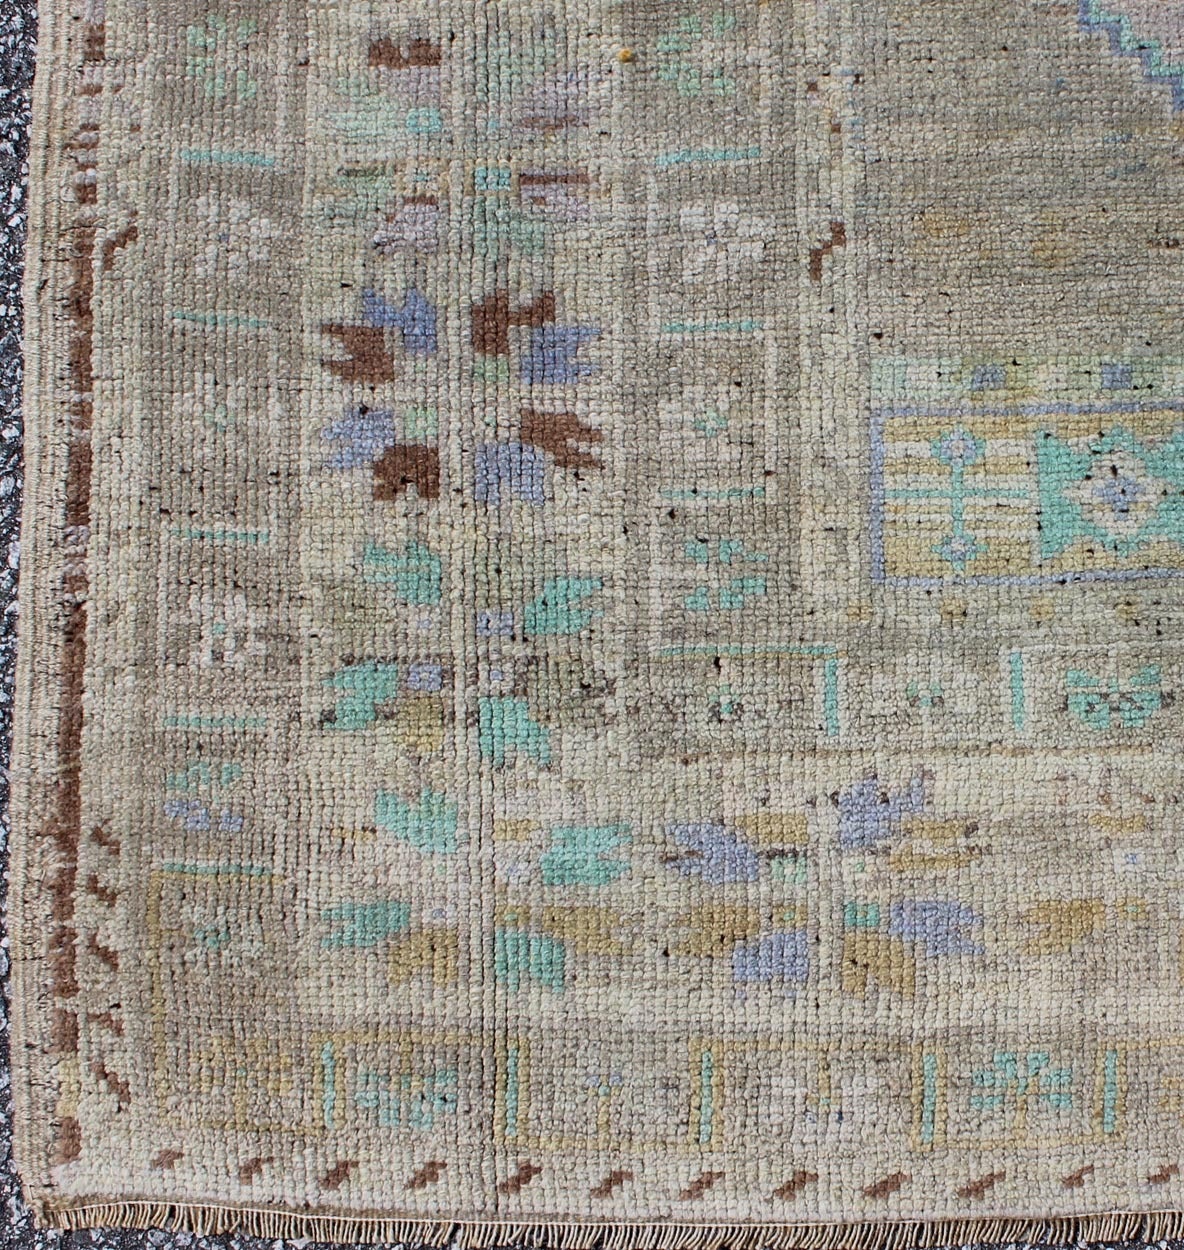 This light colored Oushak demonstrates a variety of delicate colors upon an elegant design. The multi-shaded colors of lavender, taupe, green, blue, purple, ivory and gold  spreads throughout  the rug creating an beautiful art for the floor.